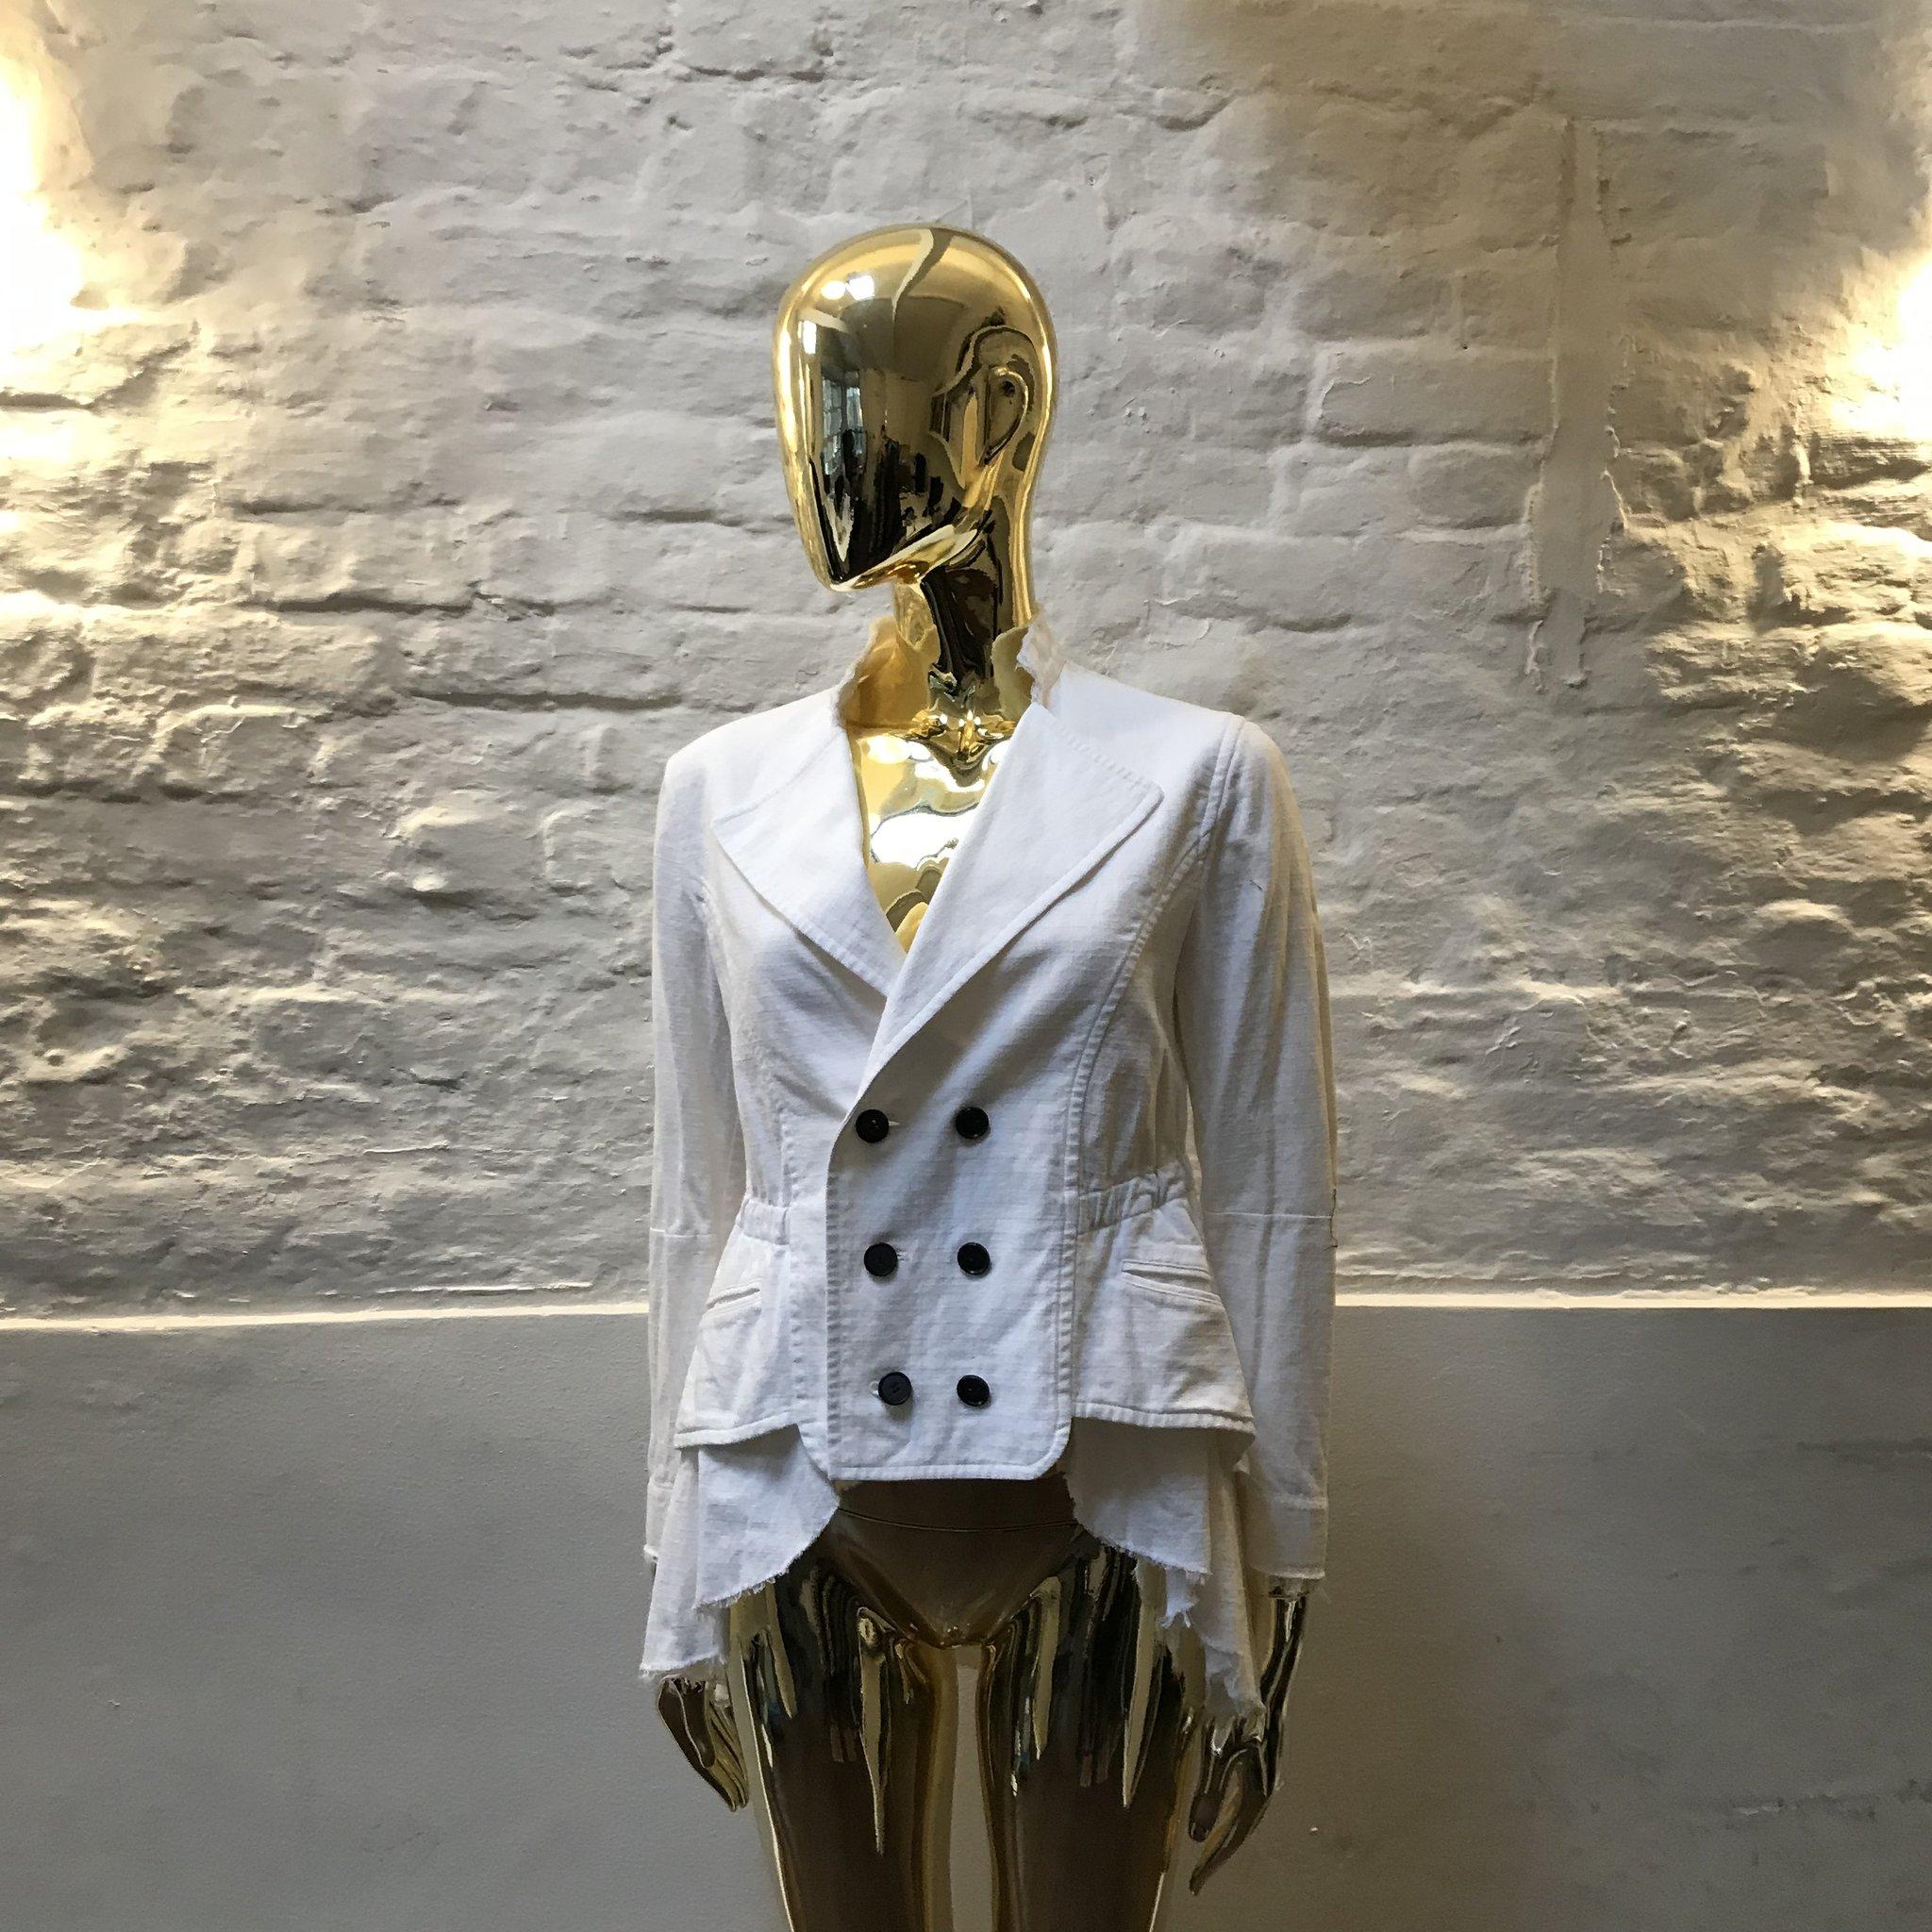 Vintage Jean Paul Gaultier White Cotton Ruffle Jacket made in France. 

Jean Paul Gaultier disrupted the rarefied world of couture with his transgressive vision of beauty.

Inspired by punks, burlesque, screen goddesses, gender-benders, fetishists